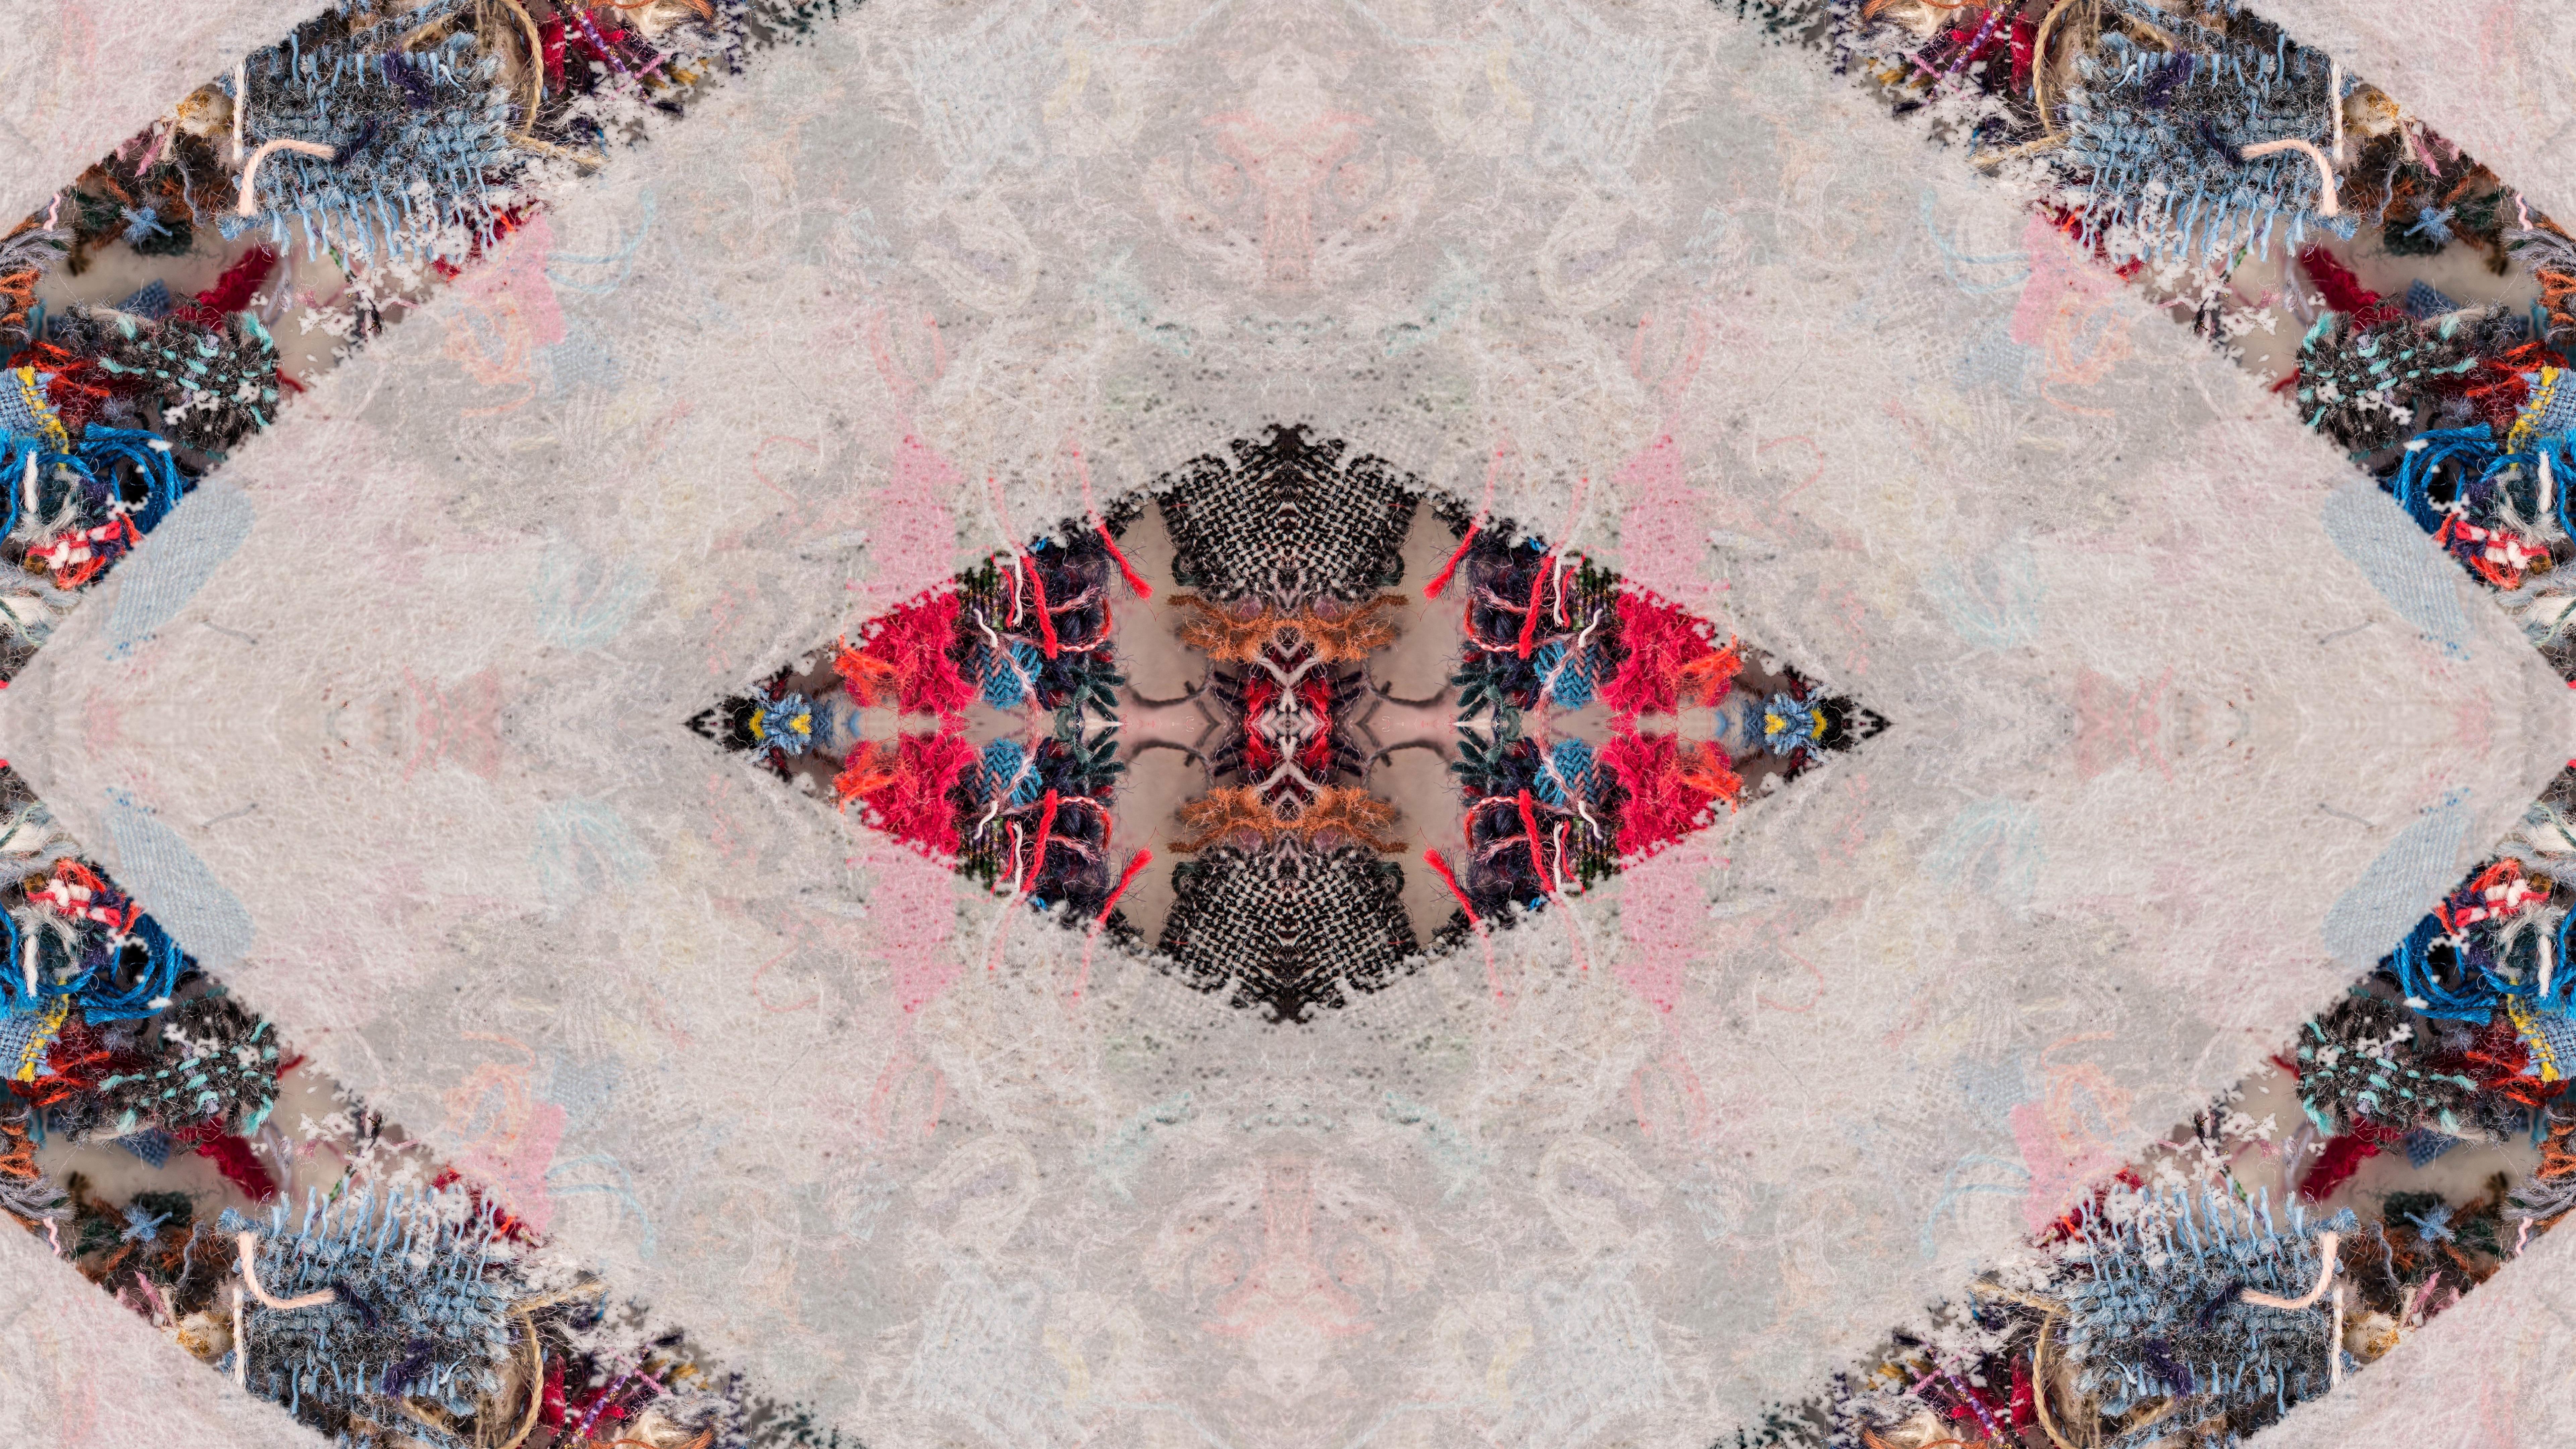 General 7680x4320 mirrored symmetry abstract pattern